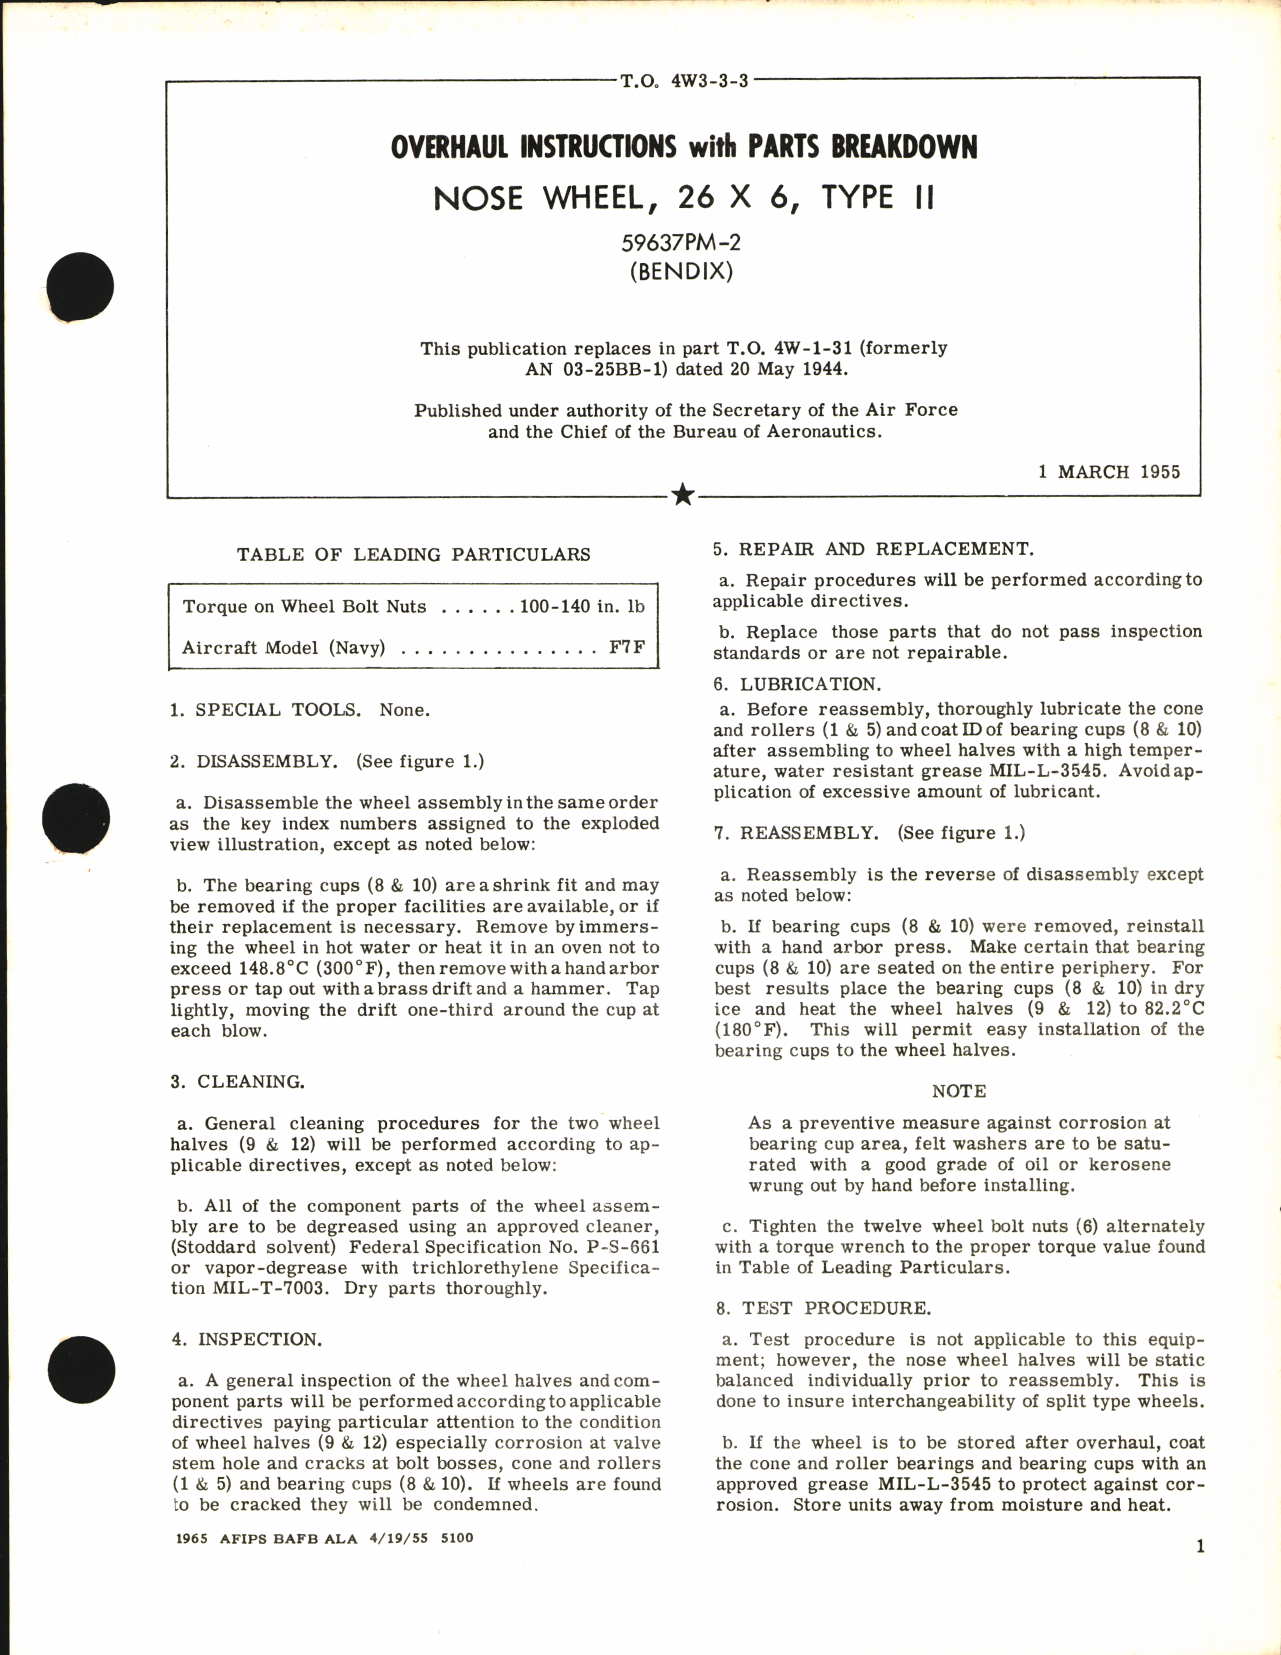 Sample page 1 from AirCorps Library document: Overhaul Instructions with Parts Breakdown for Nose Wheel 26 x 6, Type II